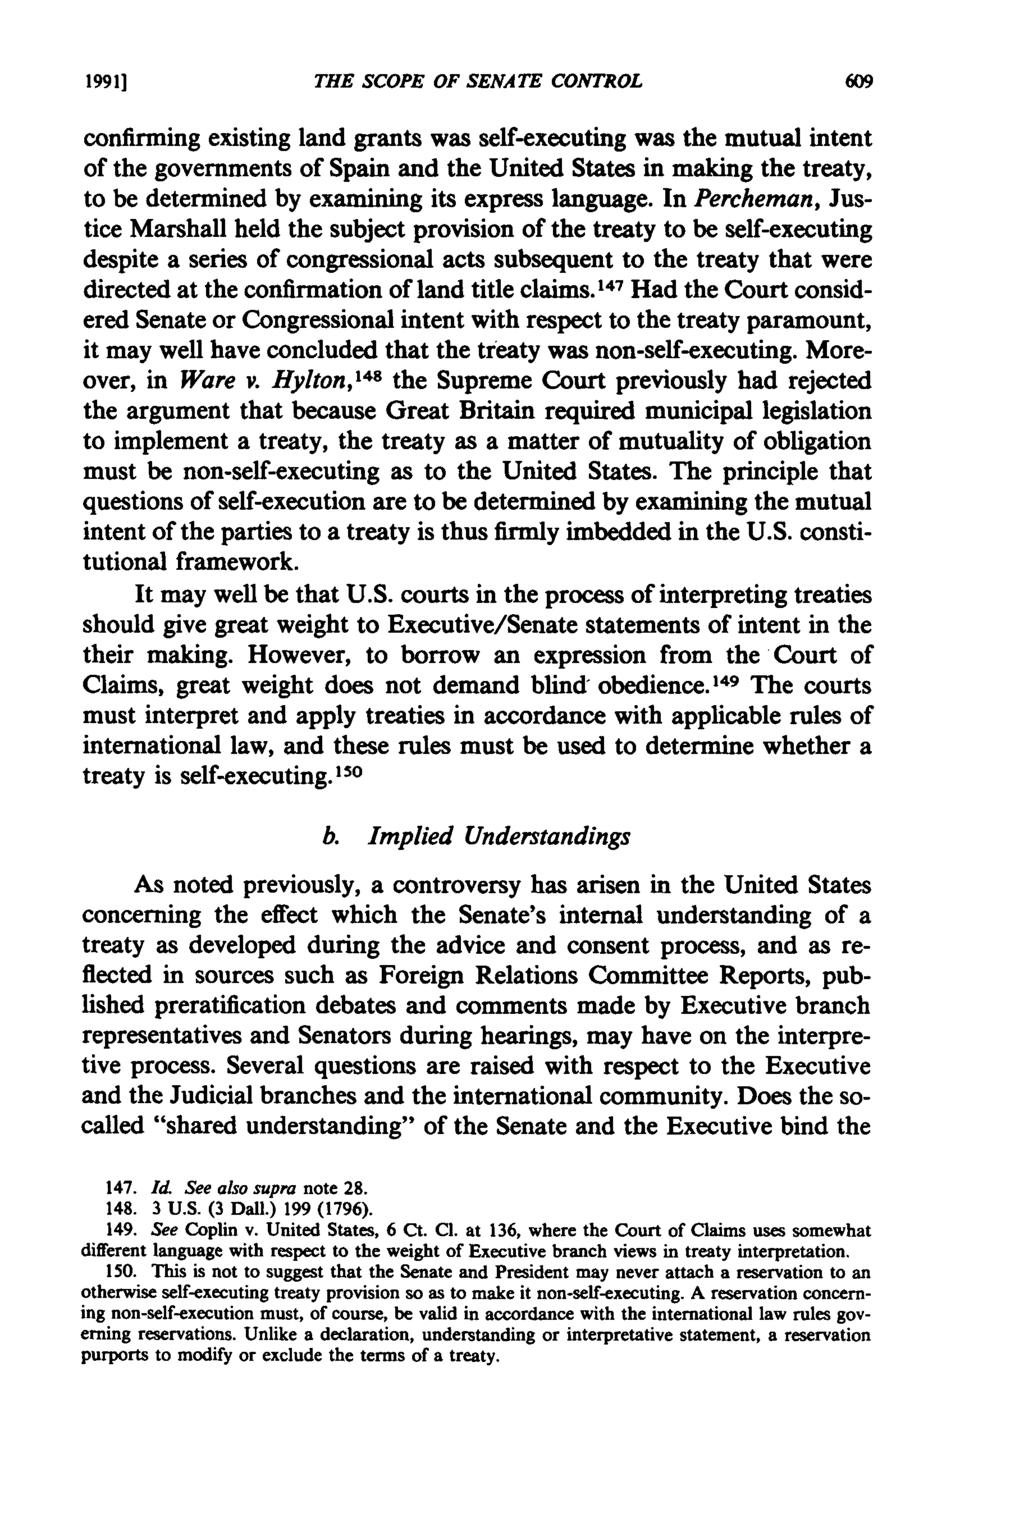 19911 THE SCOPE OF SENATE CONTROL confirming existing land grants was self-executing was the mutual intent of the governments of Spain and the United States in making the treaty, to be determined by